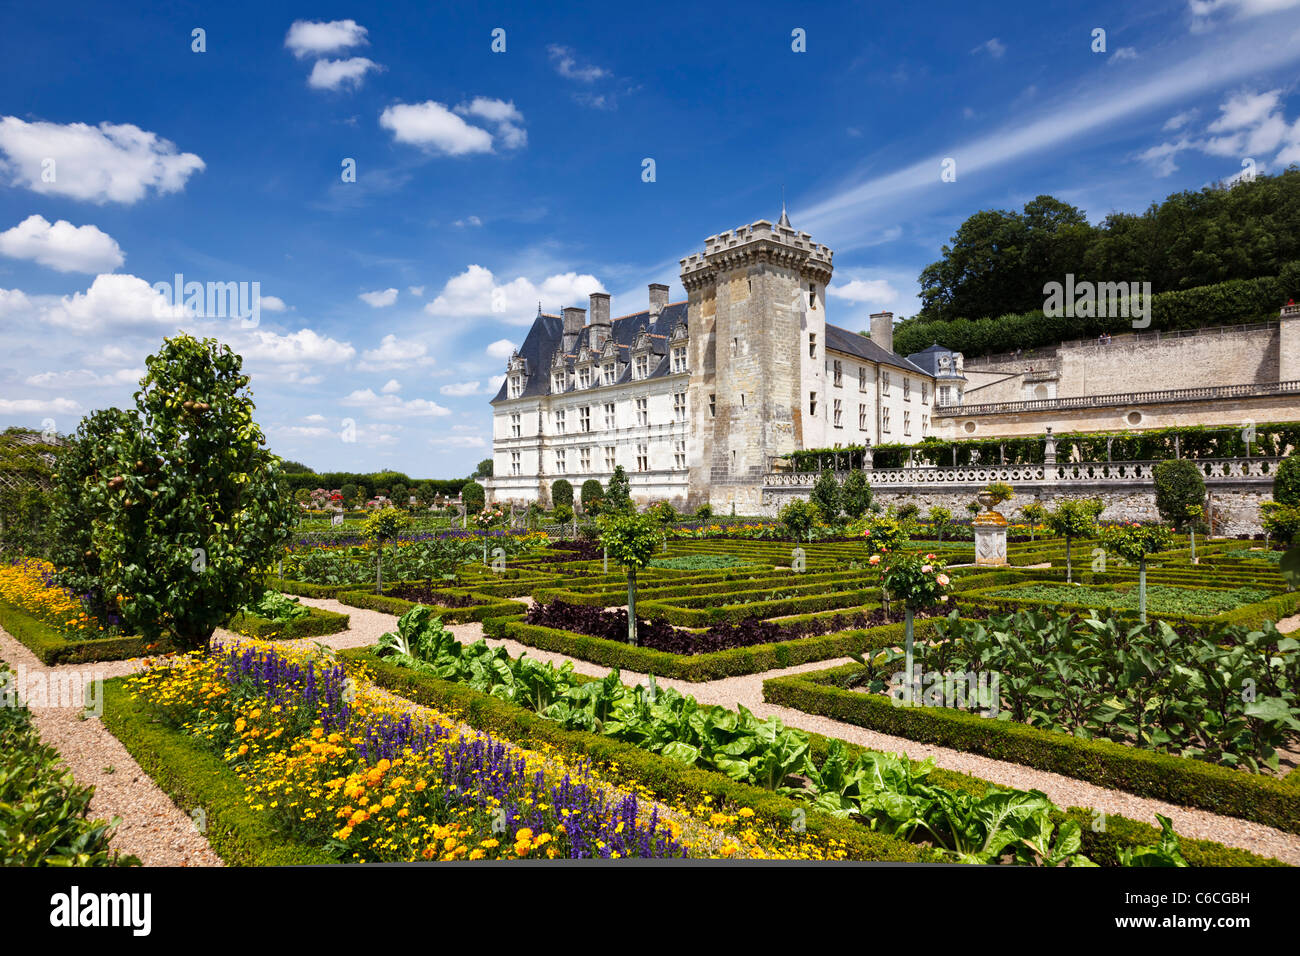 Gardens and french chateau at Villandry, Indre et Loire, France, Europe Stock Photo